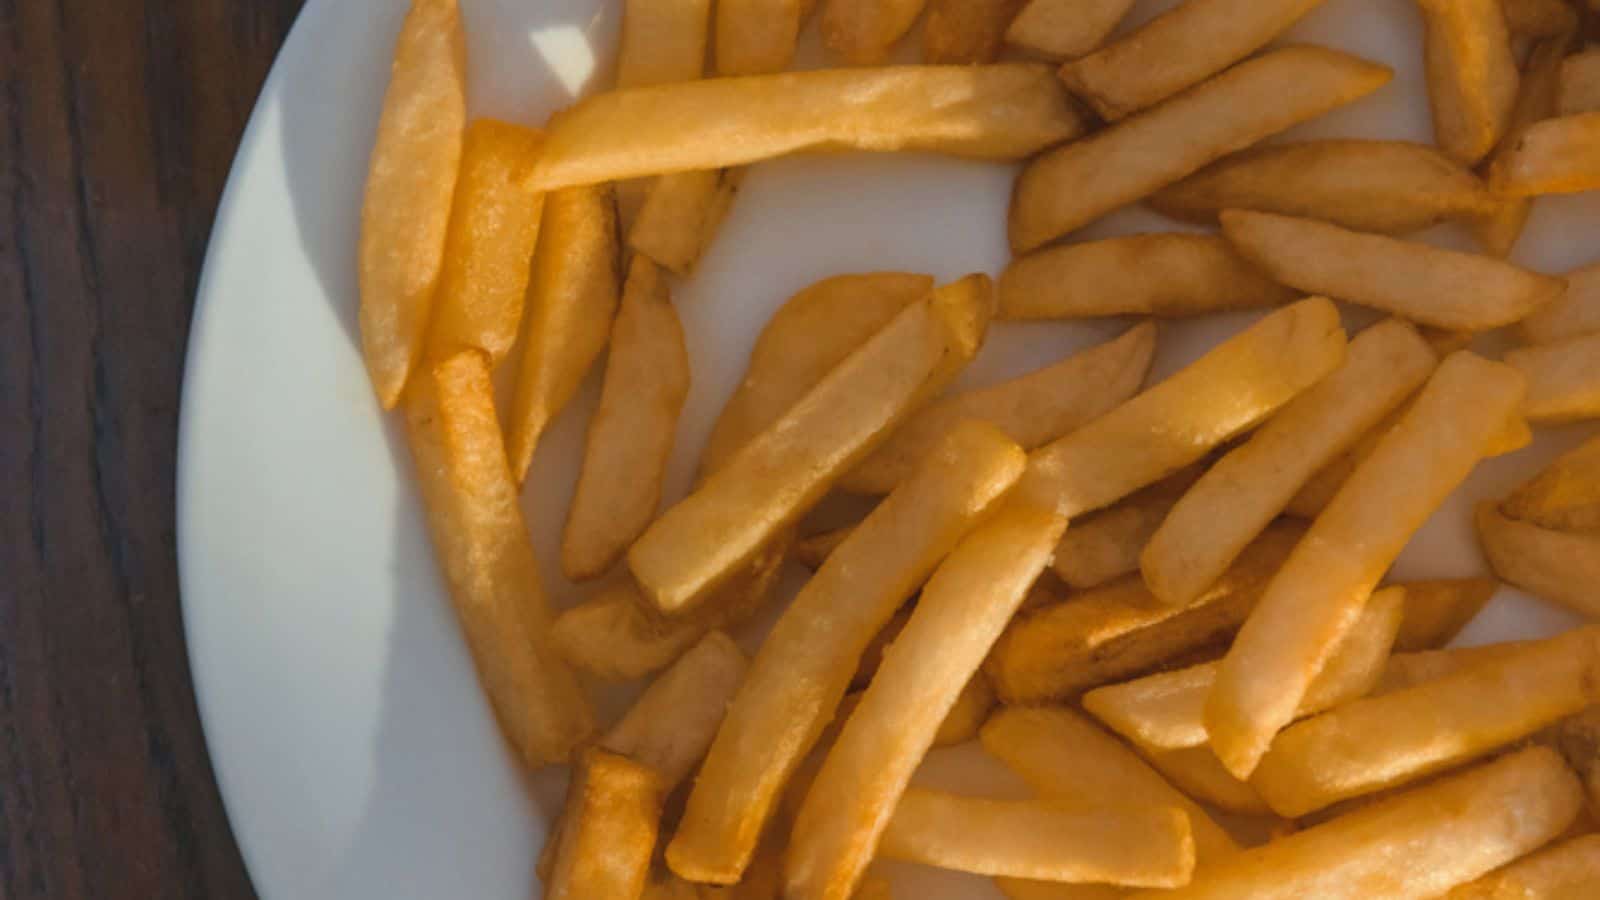 Top view of french fries over white plate